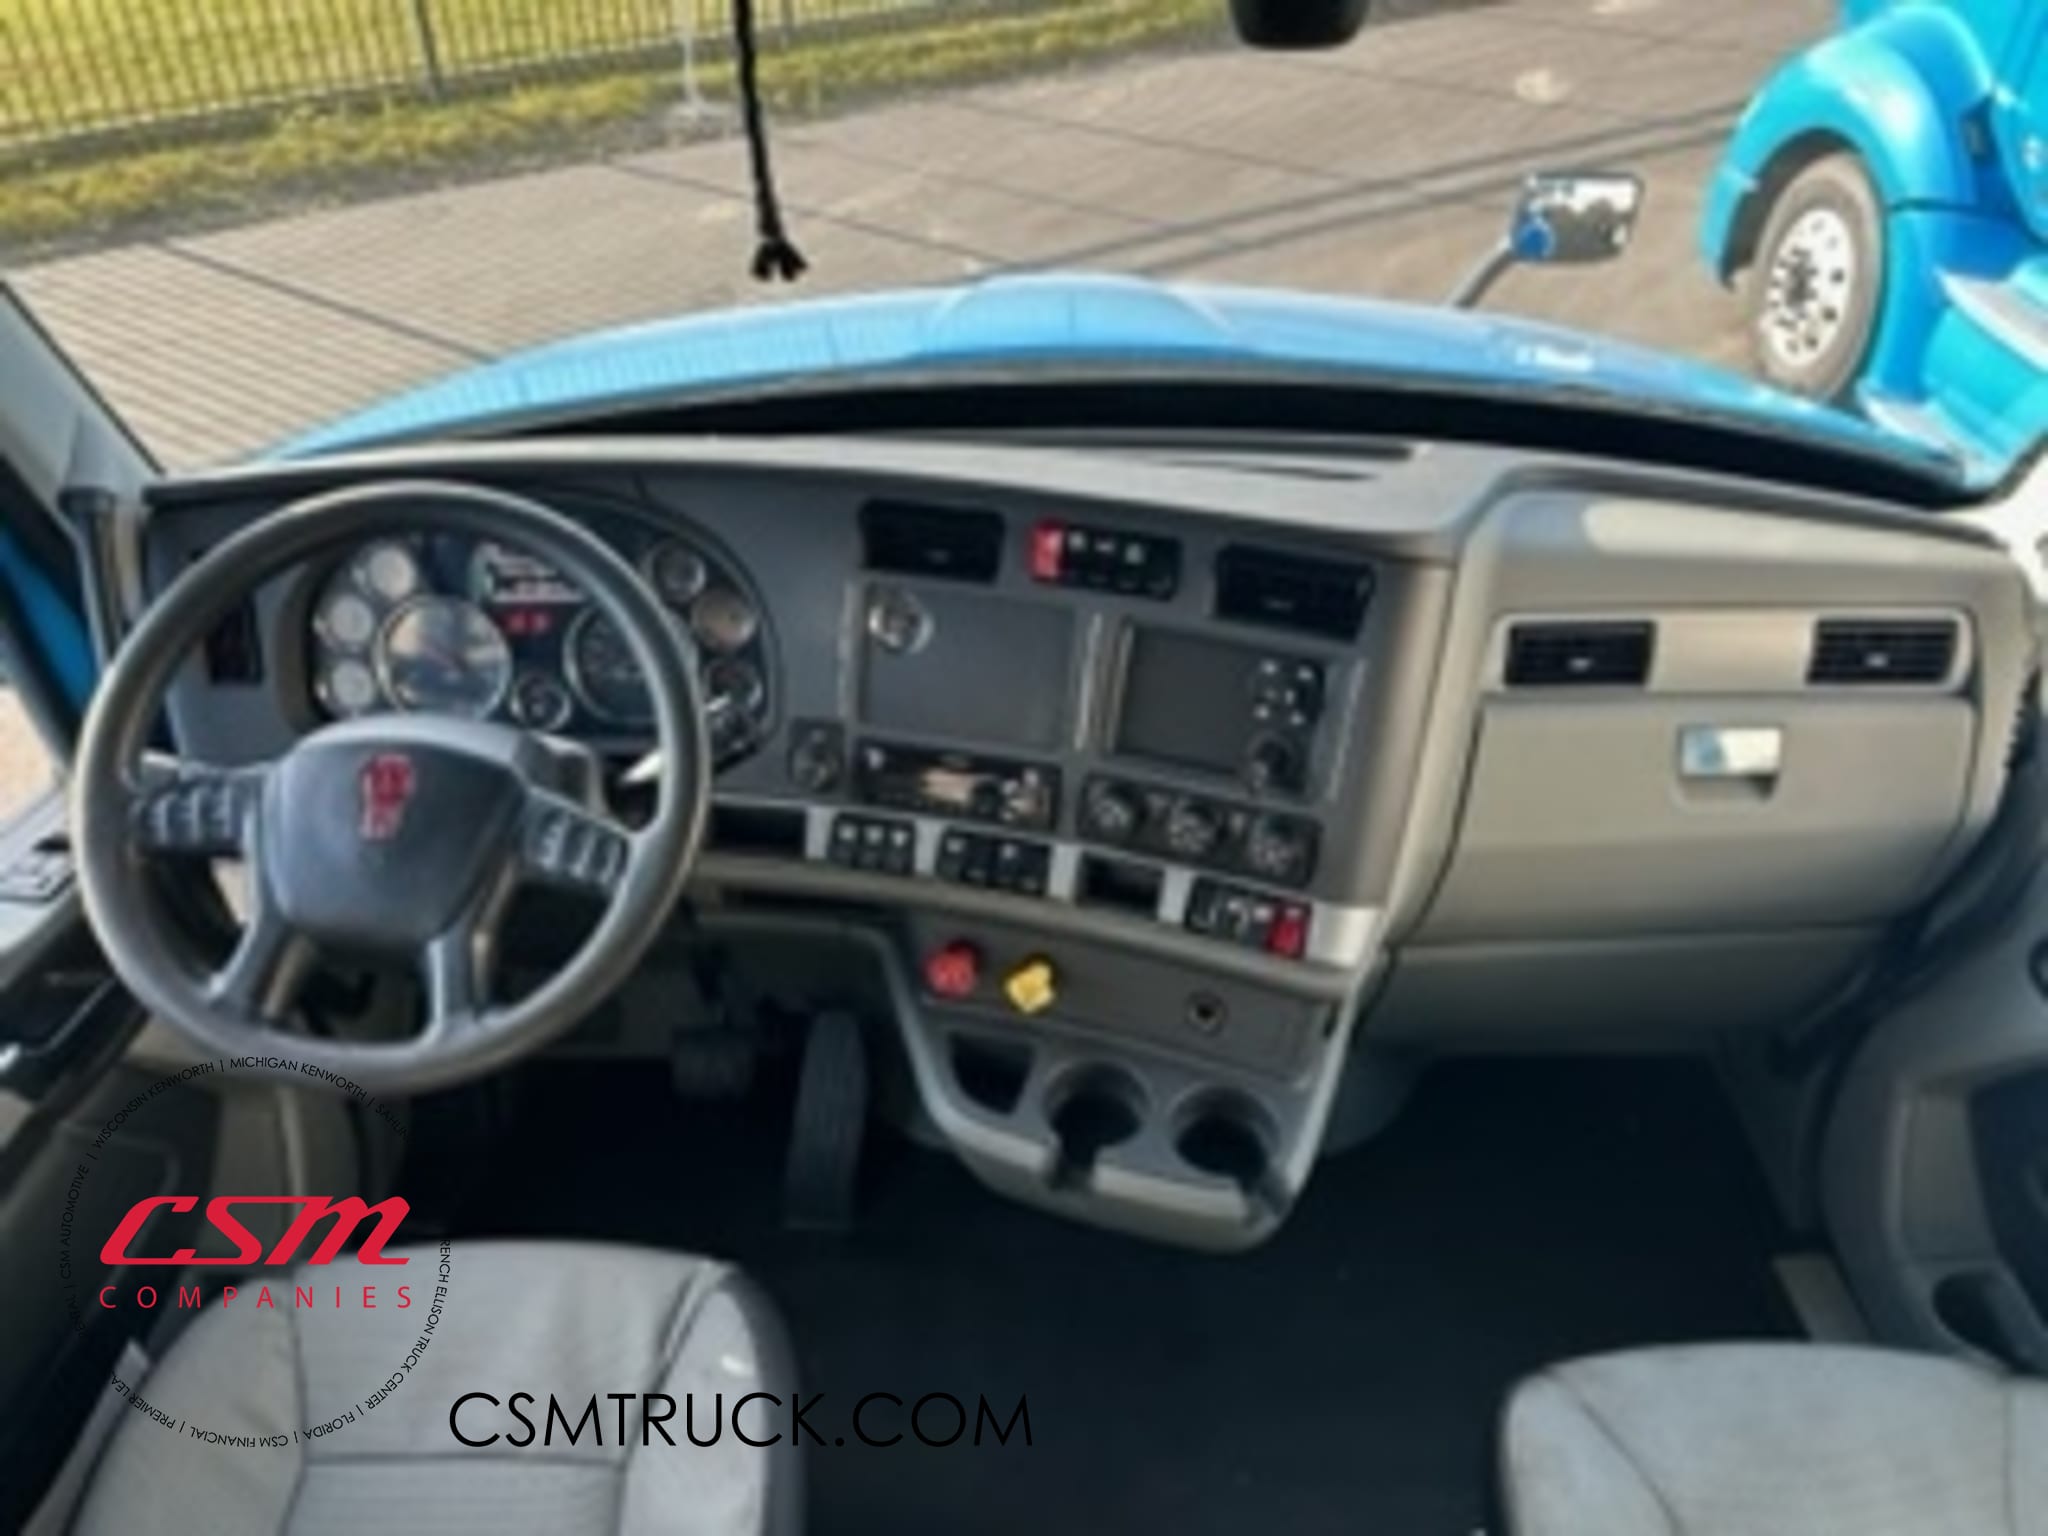 Interior cockpit for this 2020 Kenworth T680 (Stock number: ULJ354418)